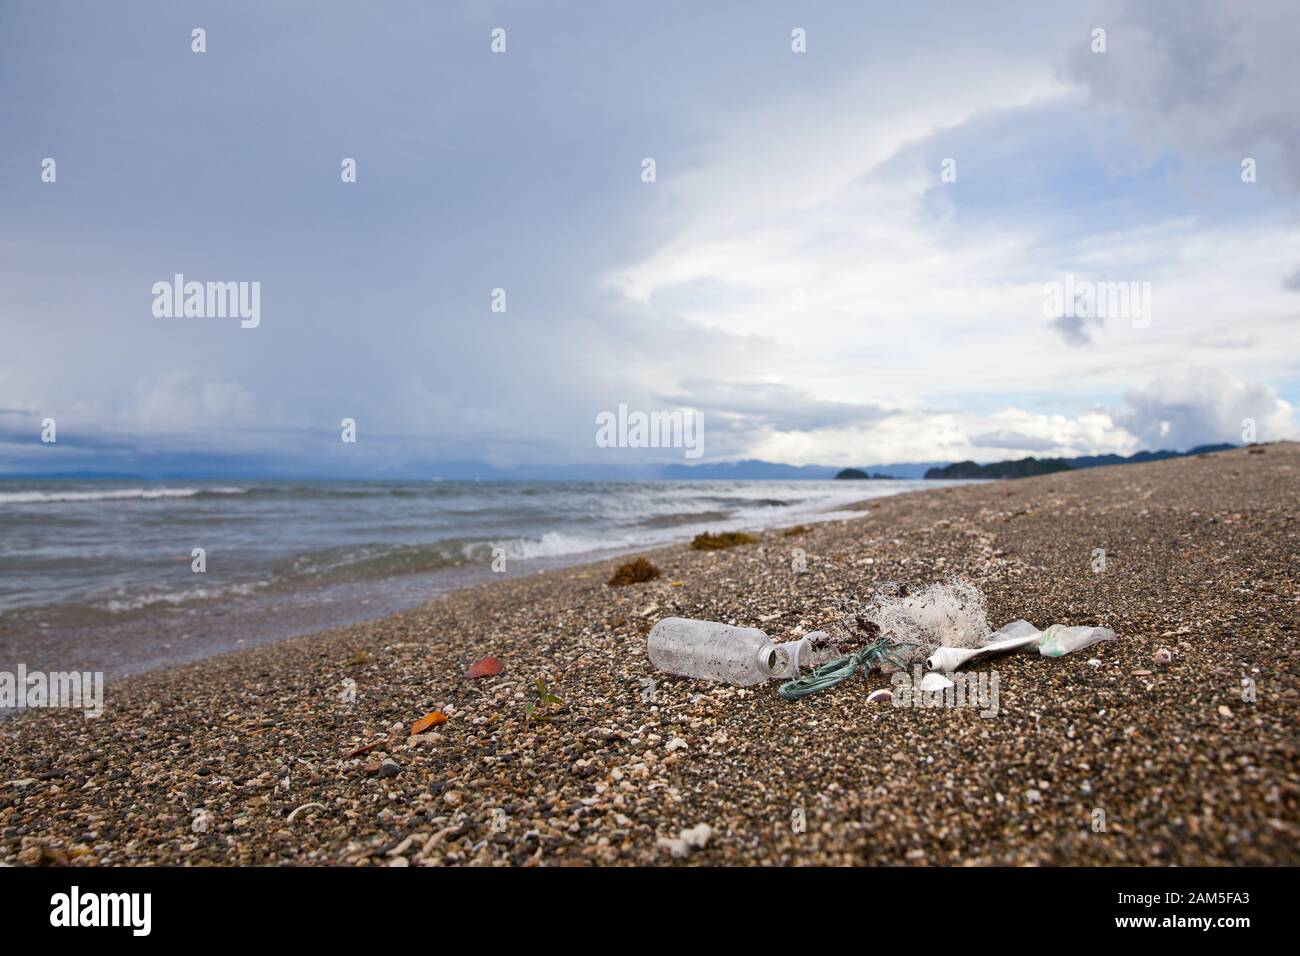 Plastic garbage thrown to the seashore. Plastic waste by the ocean. Stock Photo